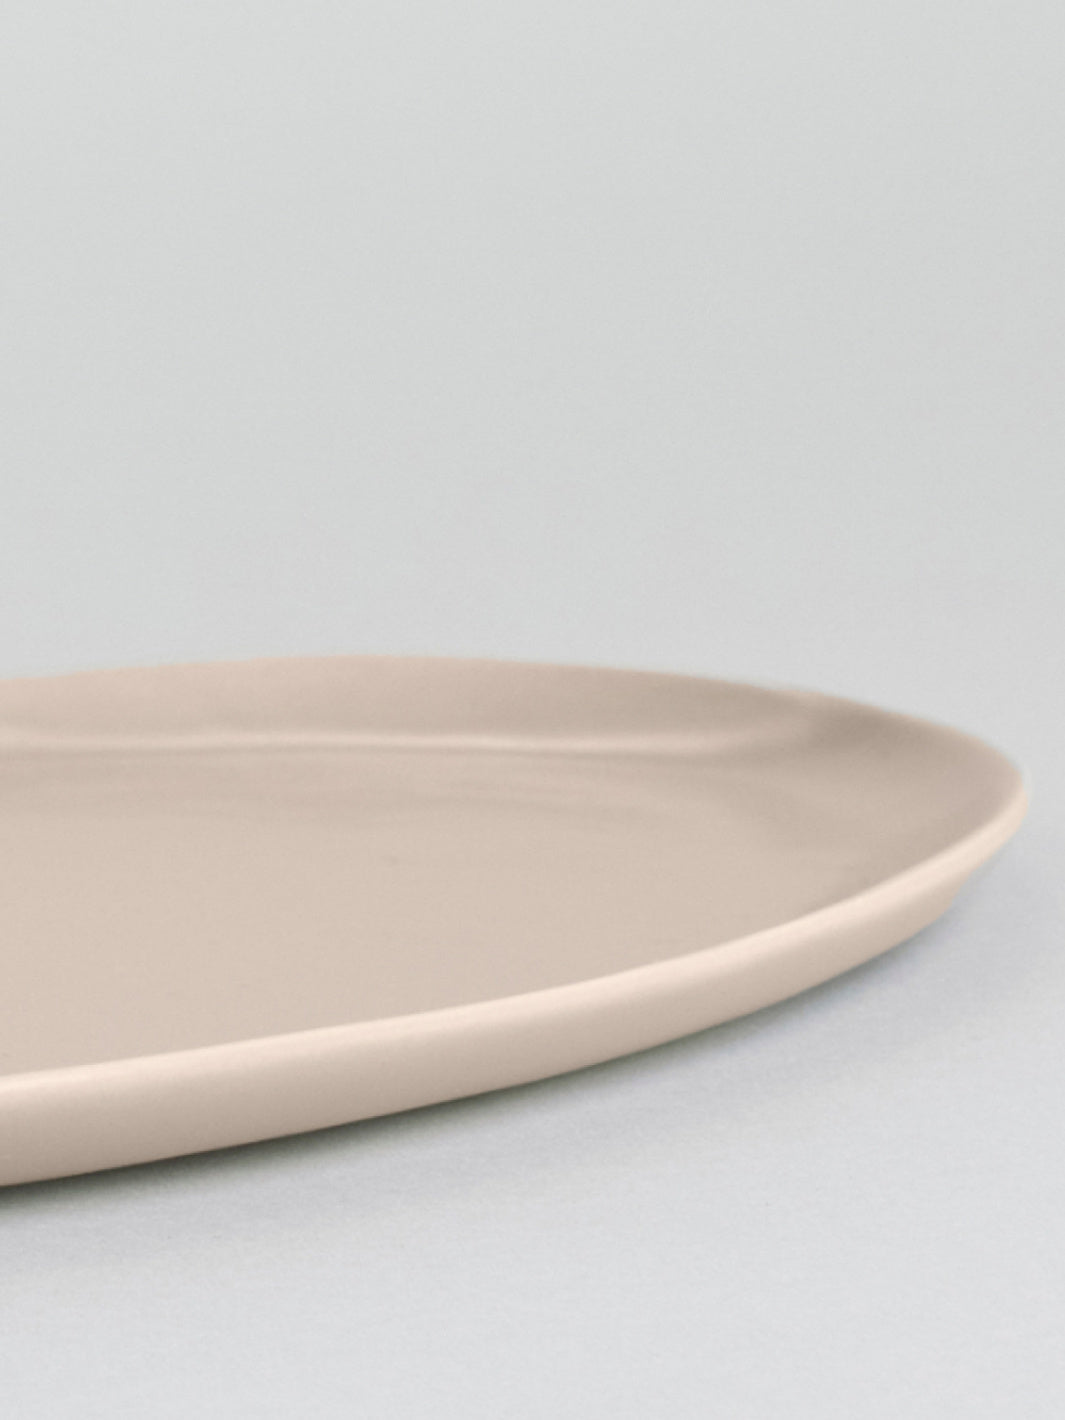 Fable Oval Platter - Dove Gray